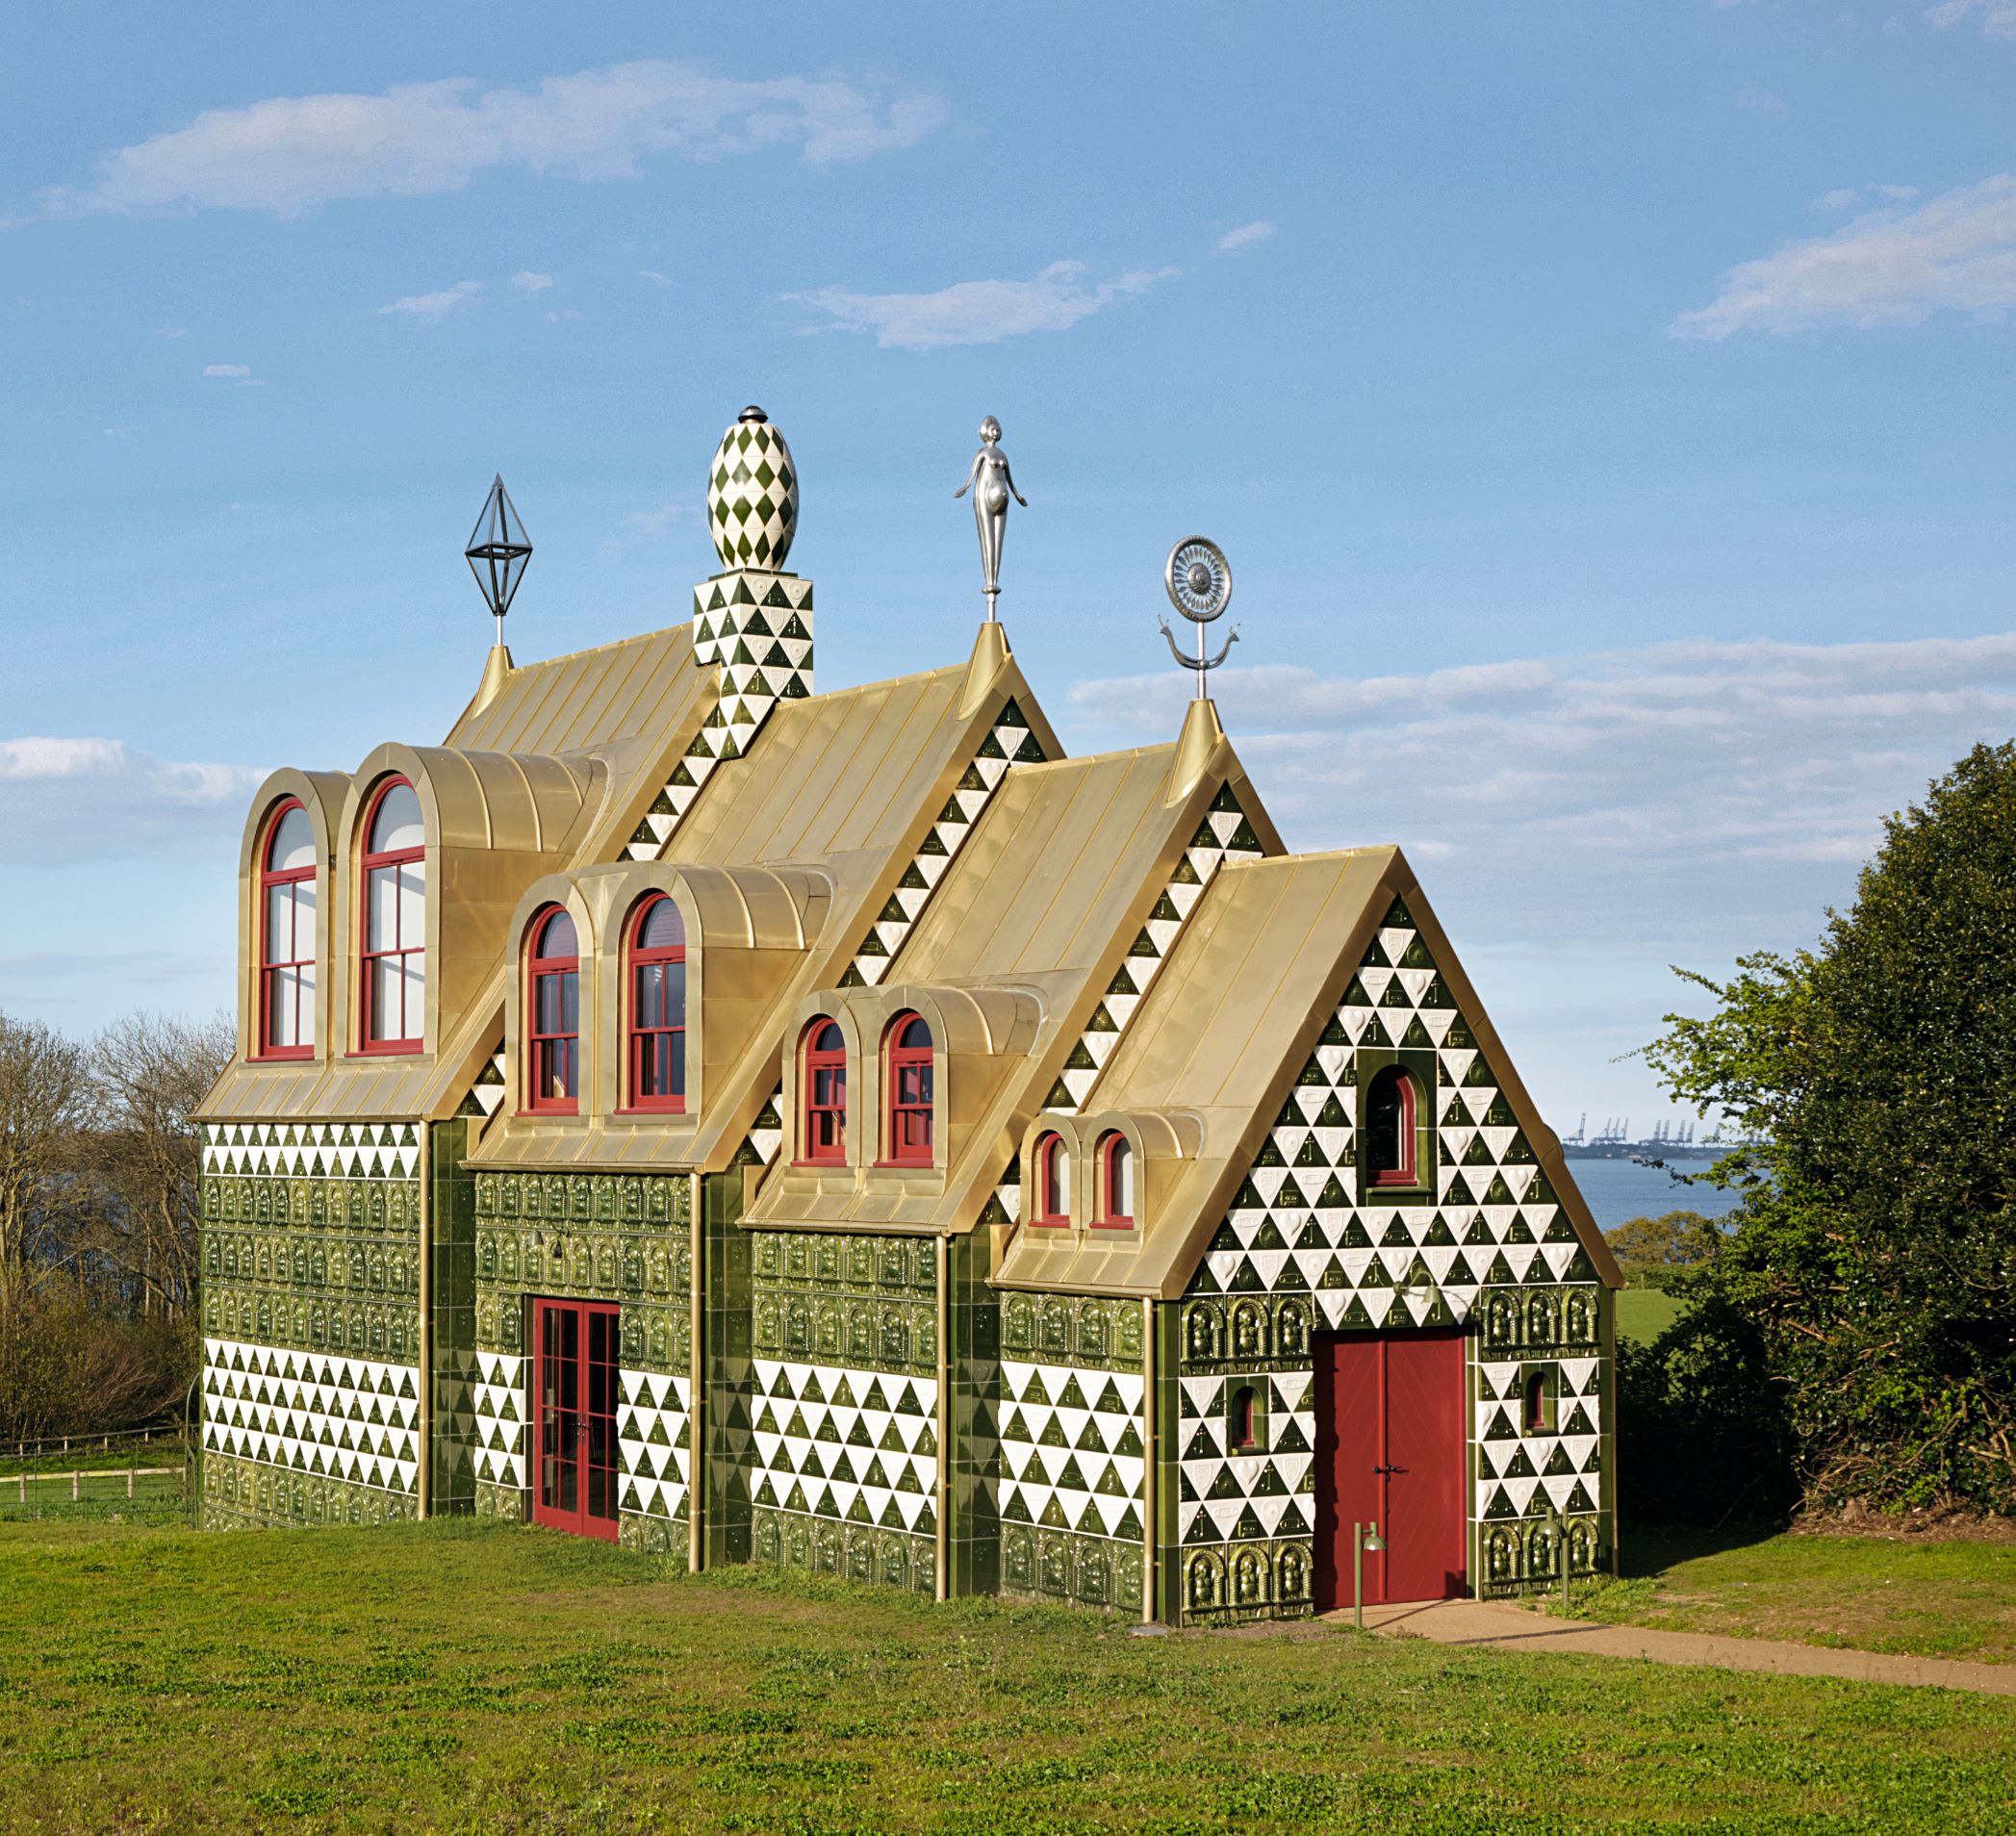 House for Essex, 2015, by Grayson Perry and FAT. As featured in Houses: Extraordinary Living